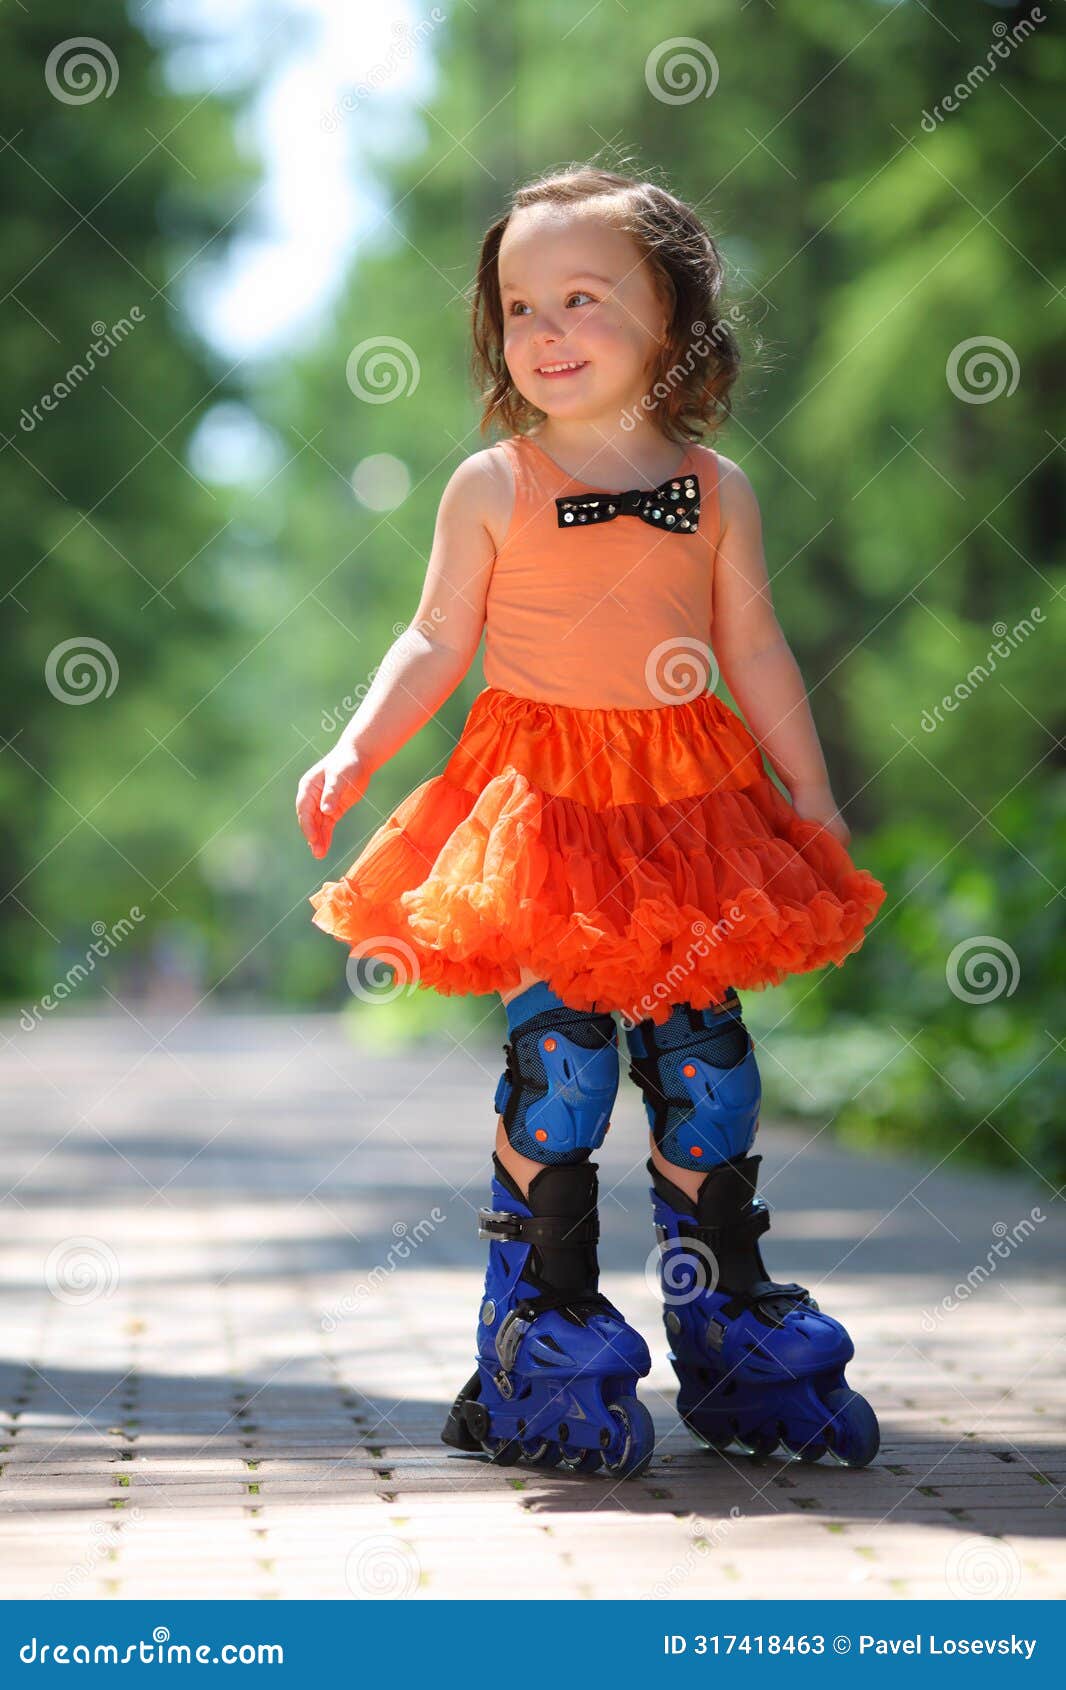 little girl in skirt roller-blades and smiles in